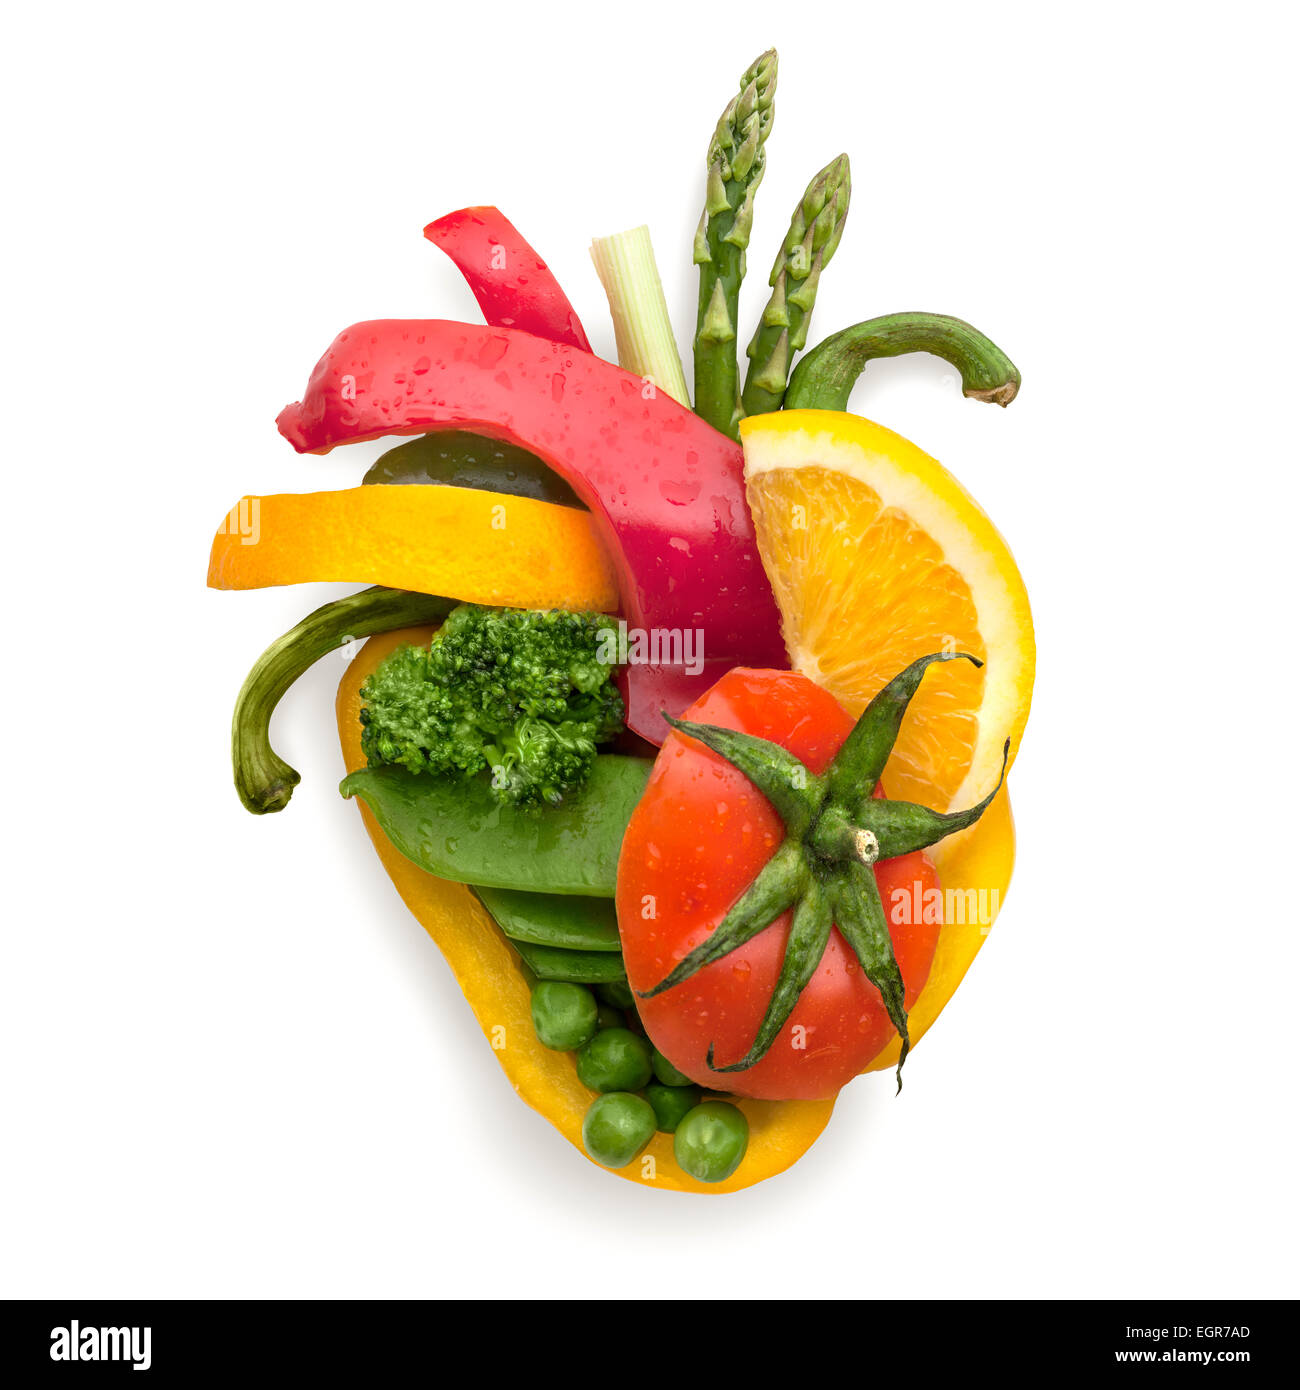 A healthy human heart of fruits and vegetables as a food concept of smart eating Stock Photo Alamy